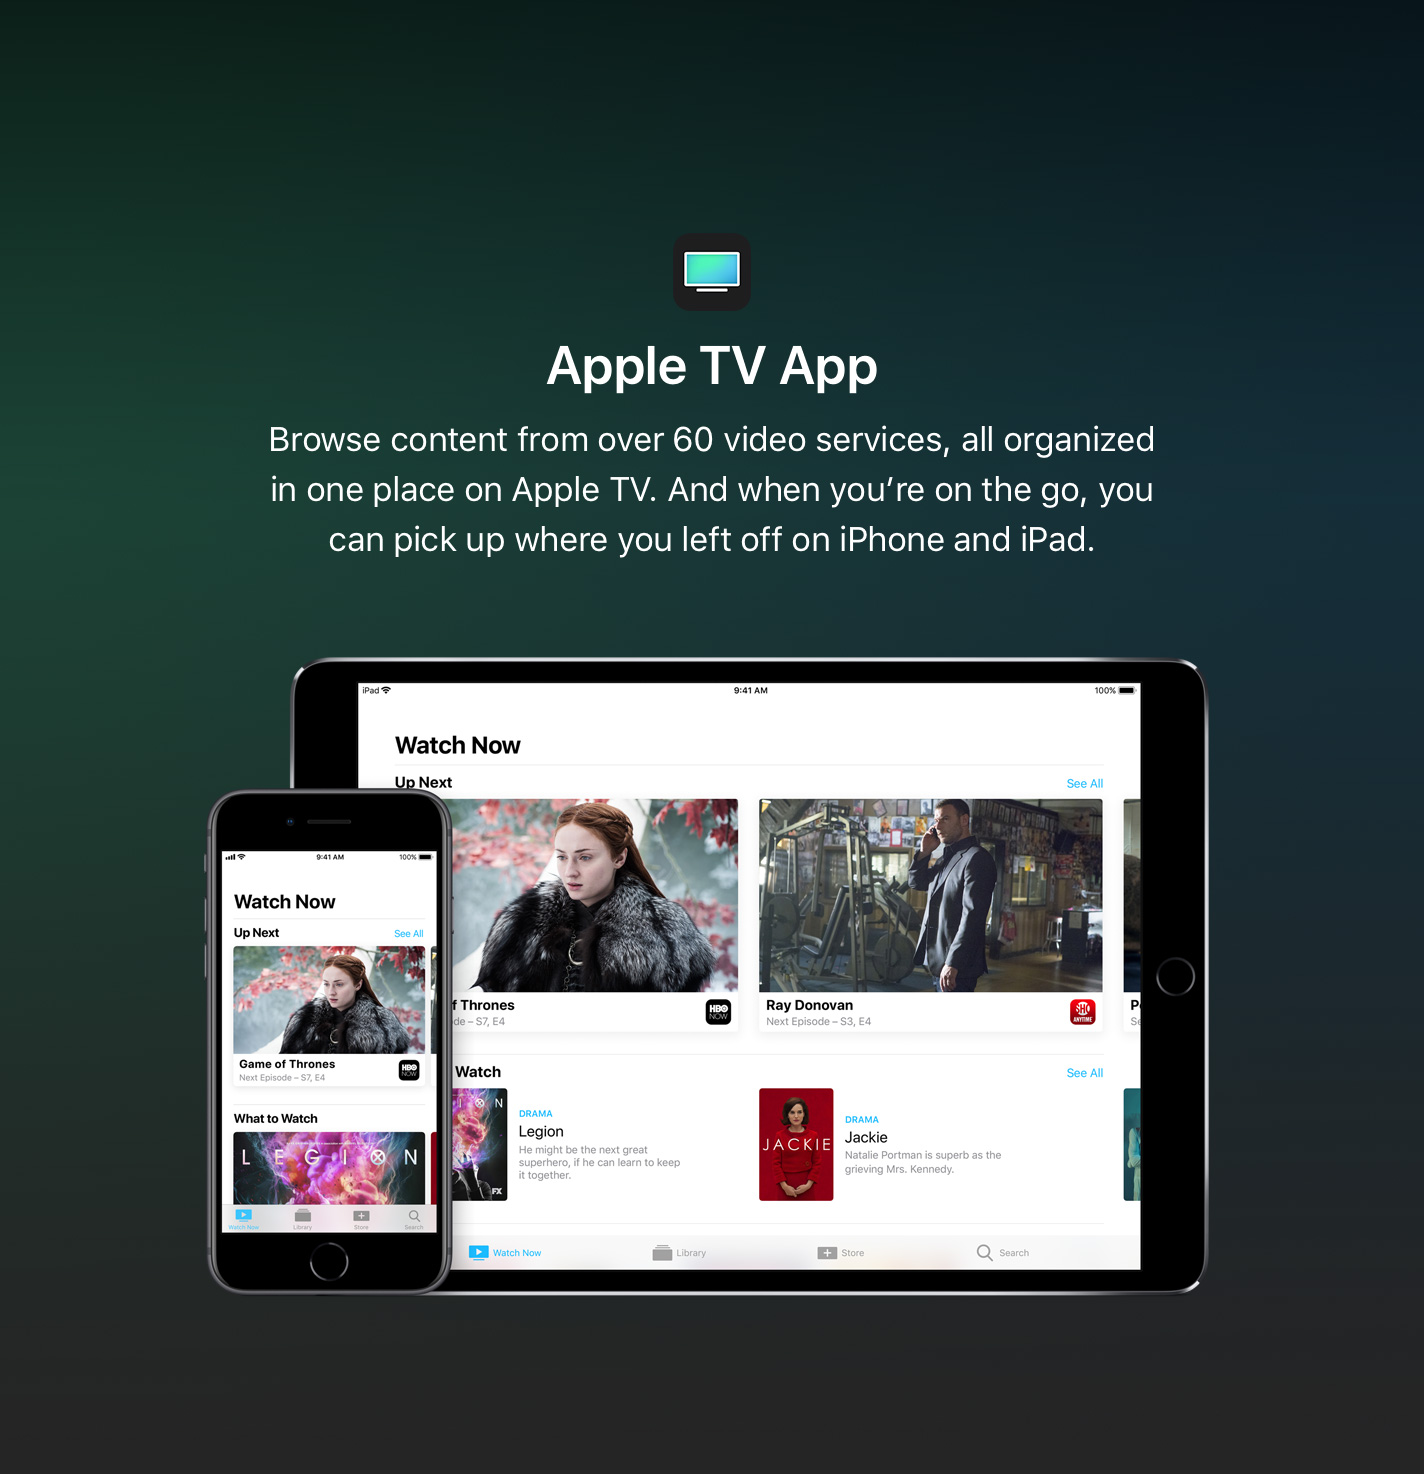 Browse content from over 60 video services, all organized in one place on Apple TV. And when you're on the go, you can pick up where you left off on iPhone and iPad.